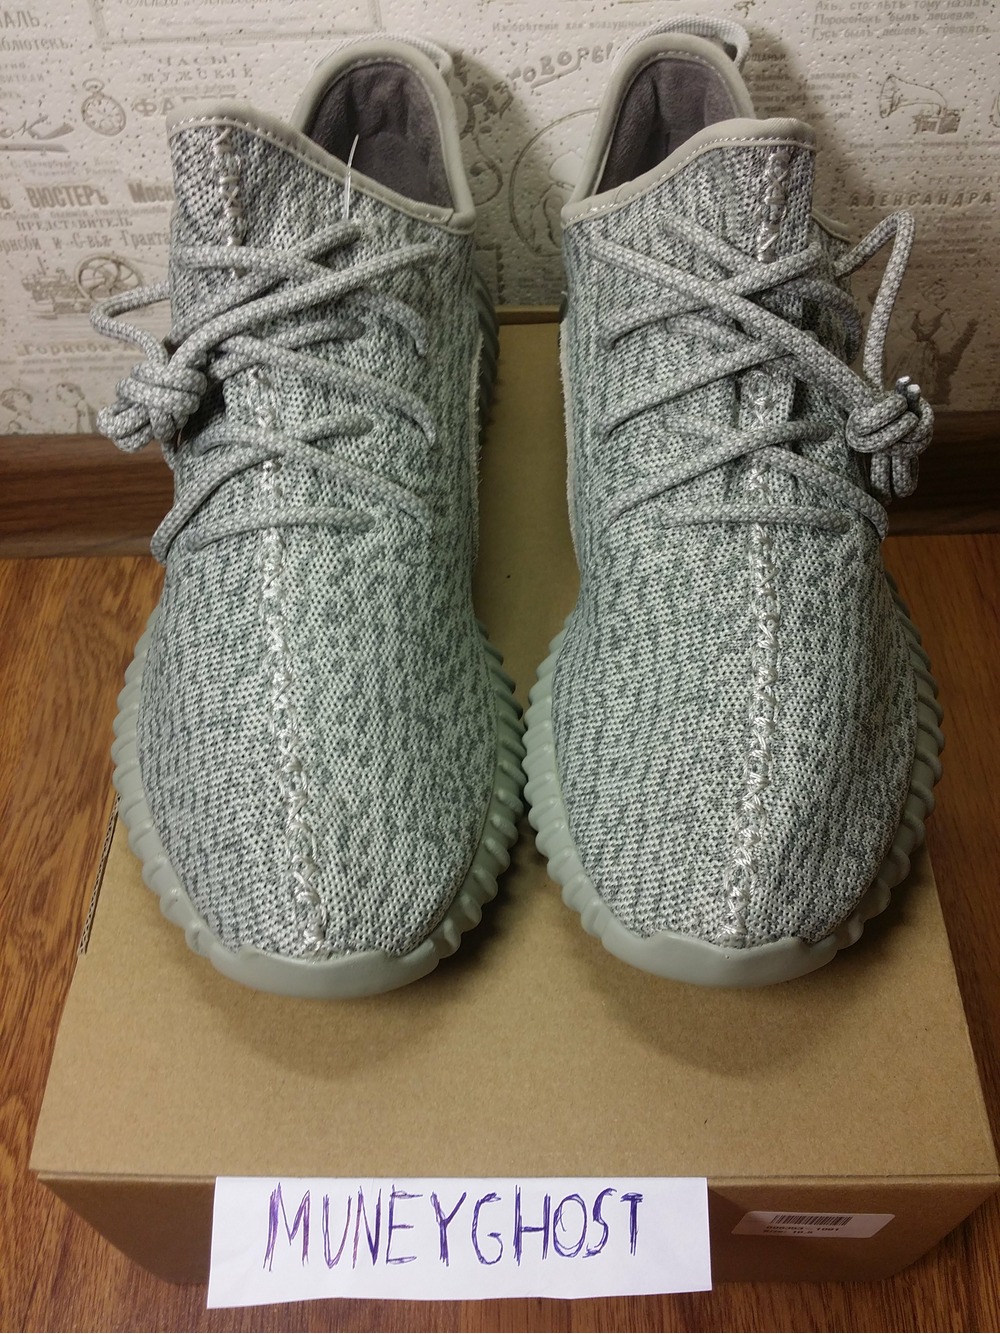 Yeezy Boost 350 Moonrock Outfits!!! #GonzoGotGame 